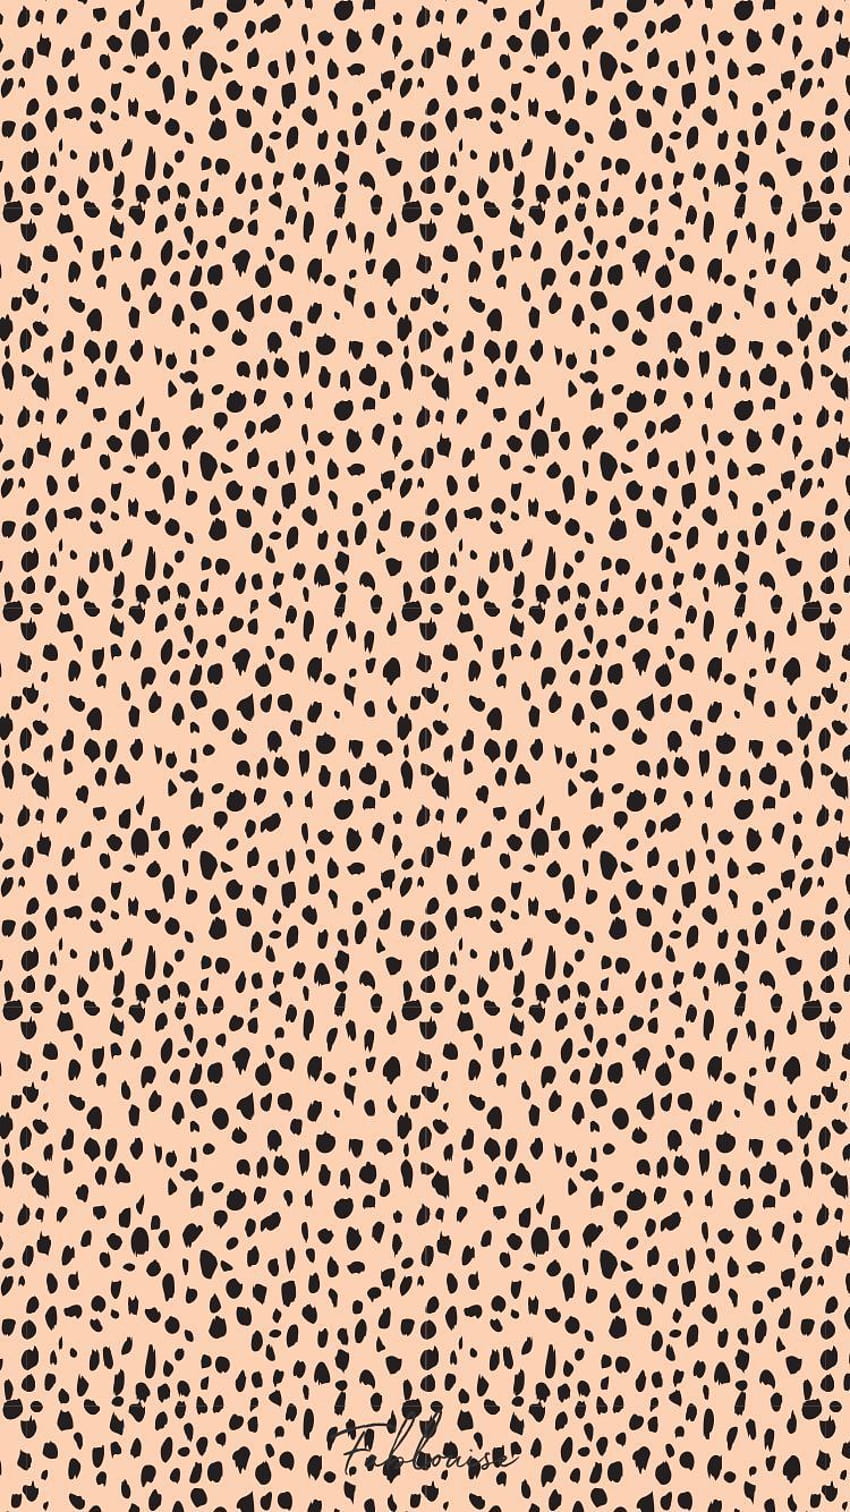 Aesthetic cheetah print wallpaper  Peel and Stick or NonPasted  Save 25